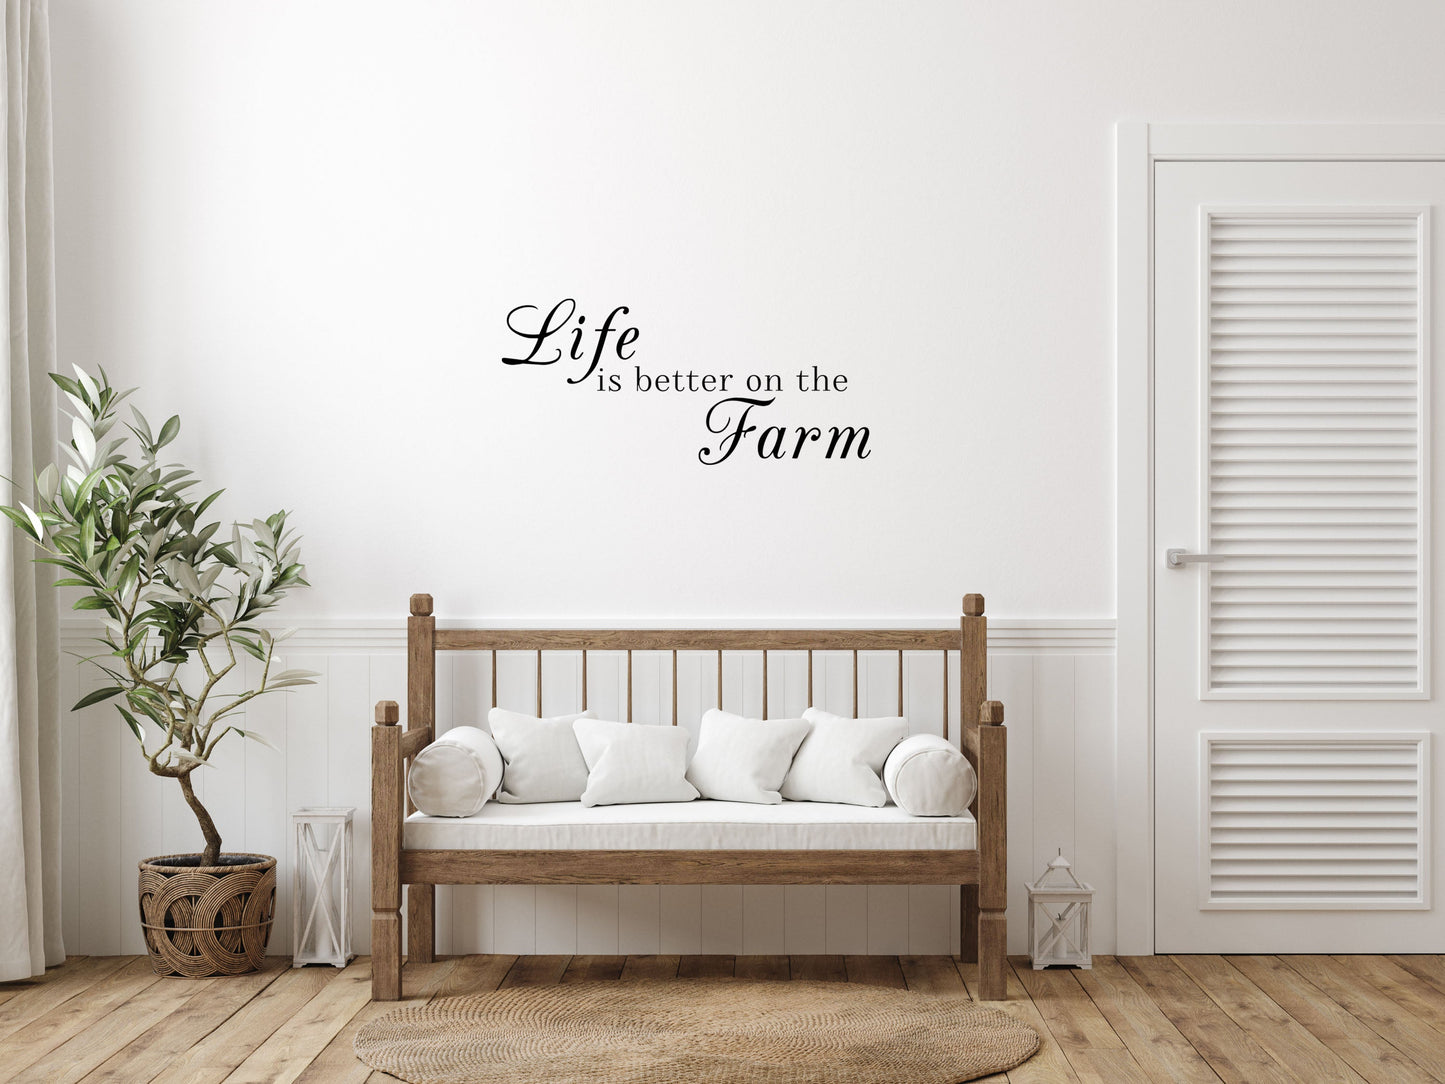 Life Is Better On The Farm Vinyl Wall Decal Inspirational Wall Signs 